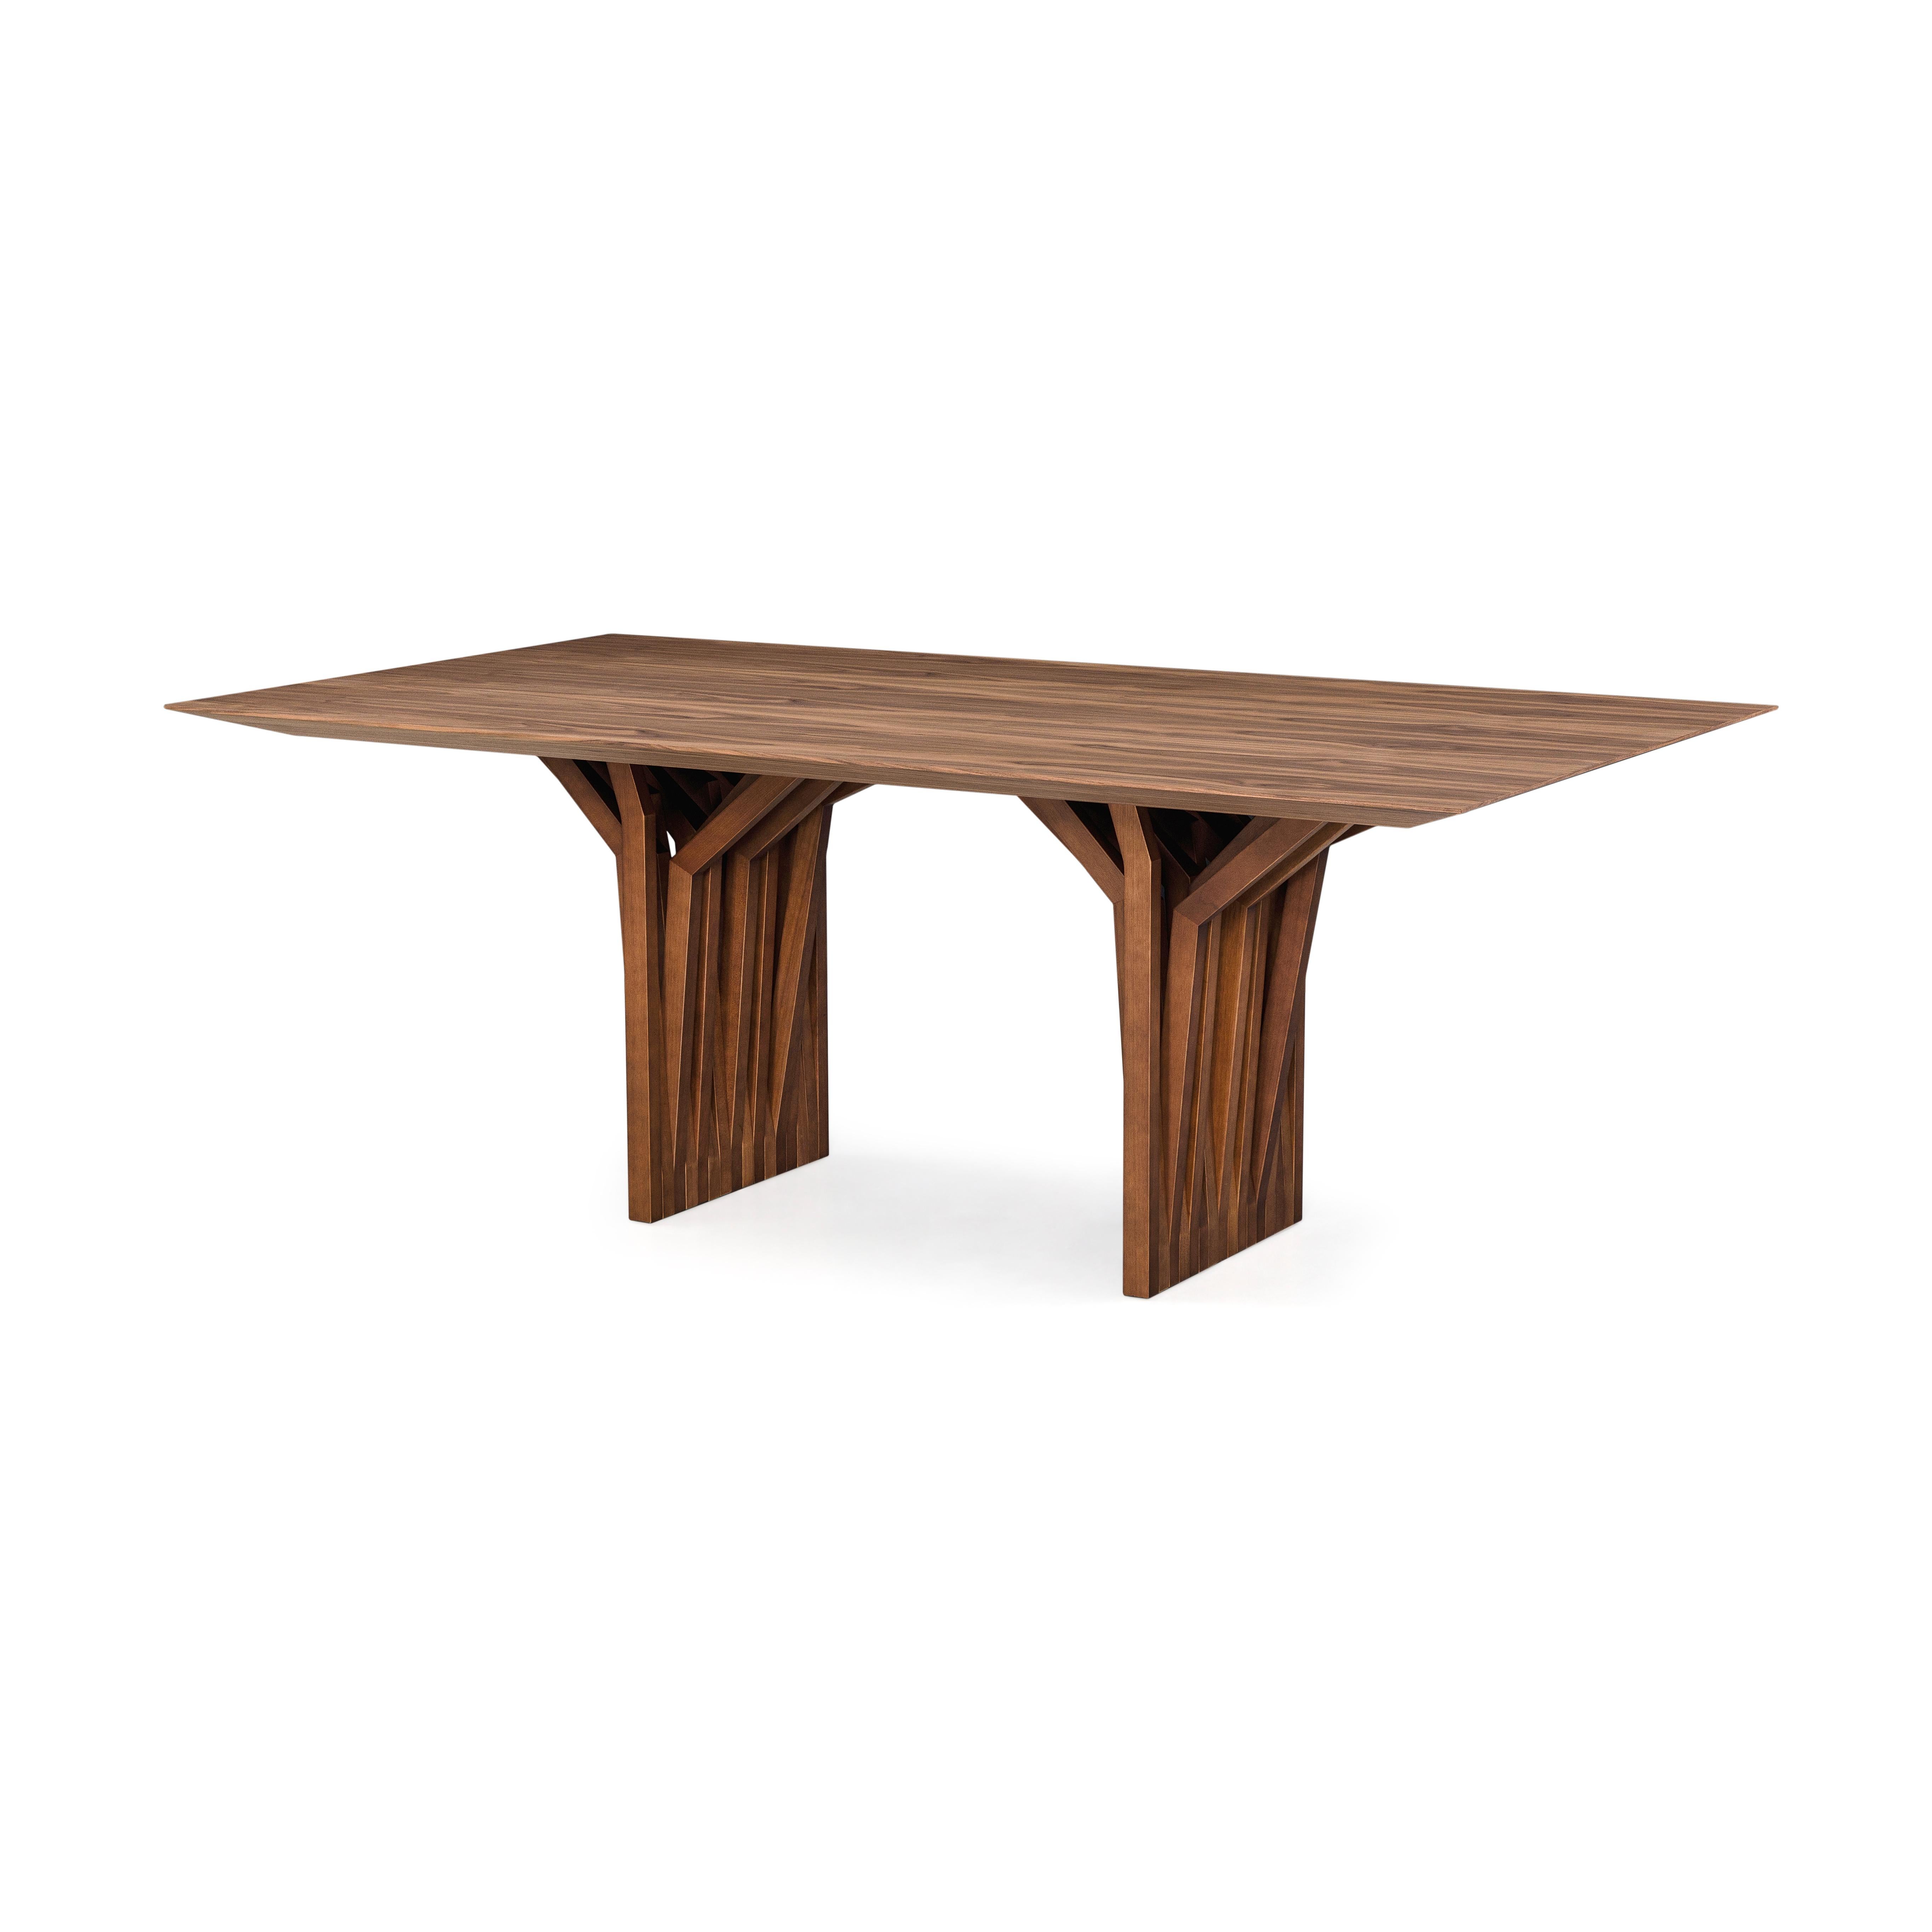 The Radi dining table is this masterpiece in a walnut finish wood veneer top and an original roofing anchor table base, inspired by the aerial roots of trees. This dining table is a very simple piece that the Uultis team has created with materials